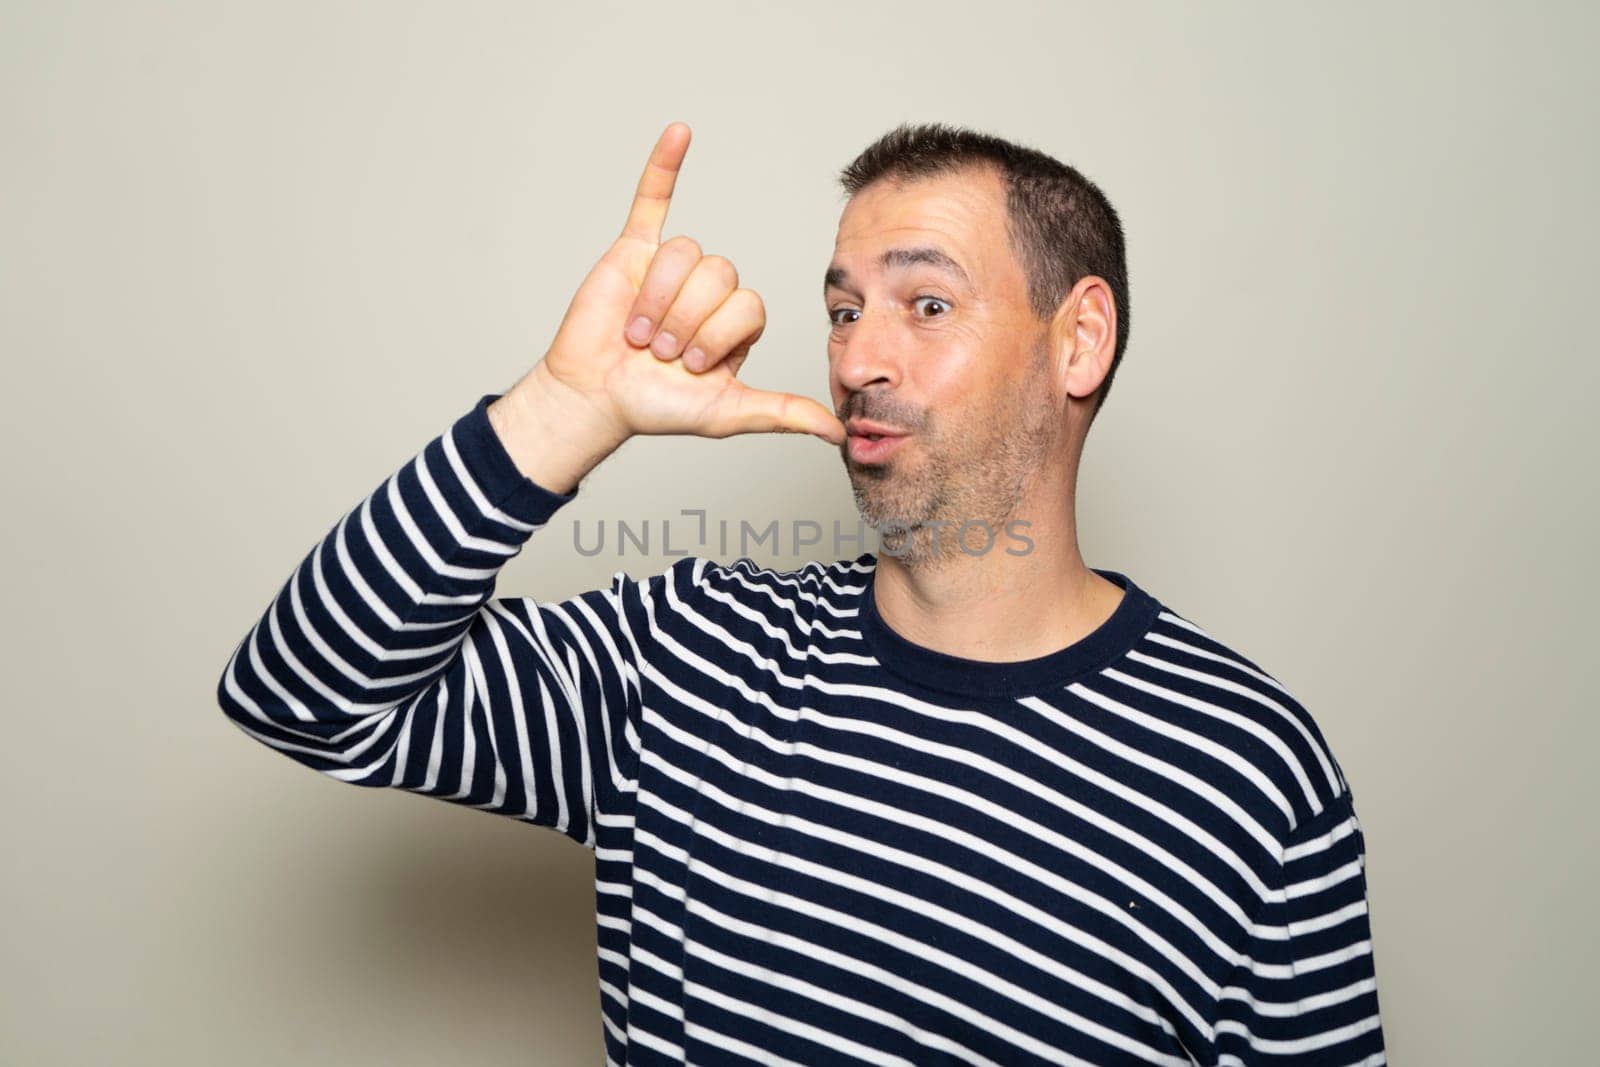 Hispanic man with beard in his 40s wearing a striped sweater making the gesture of being drunk isolated on beige studio background by Barriolo82